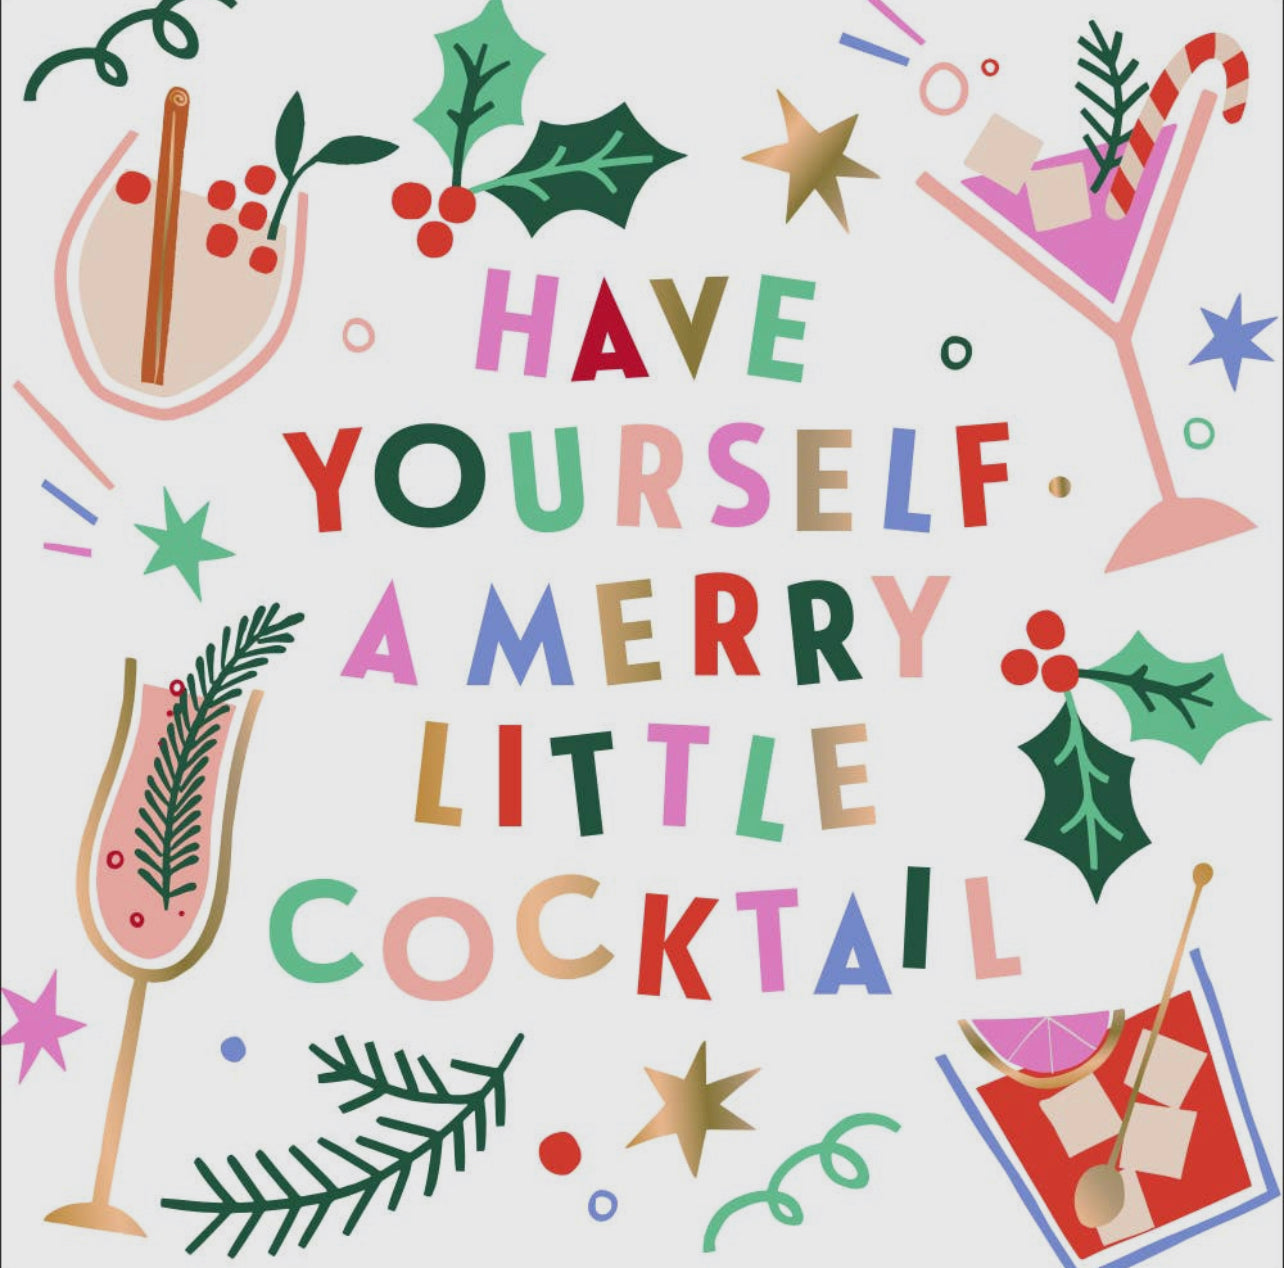 holiday cocktail napkins with a white background featuring different cocktail glasses, holly berries, and stars in festive colors with the words "have yourself a merry little cocktail" in the center and bits of gold foil for accent